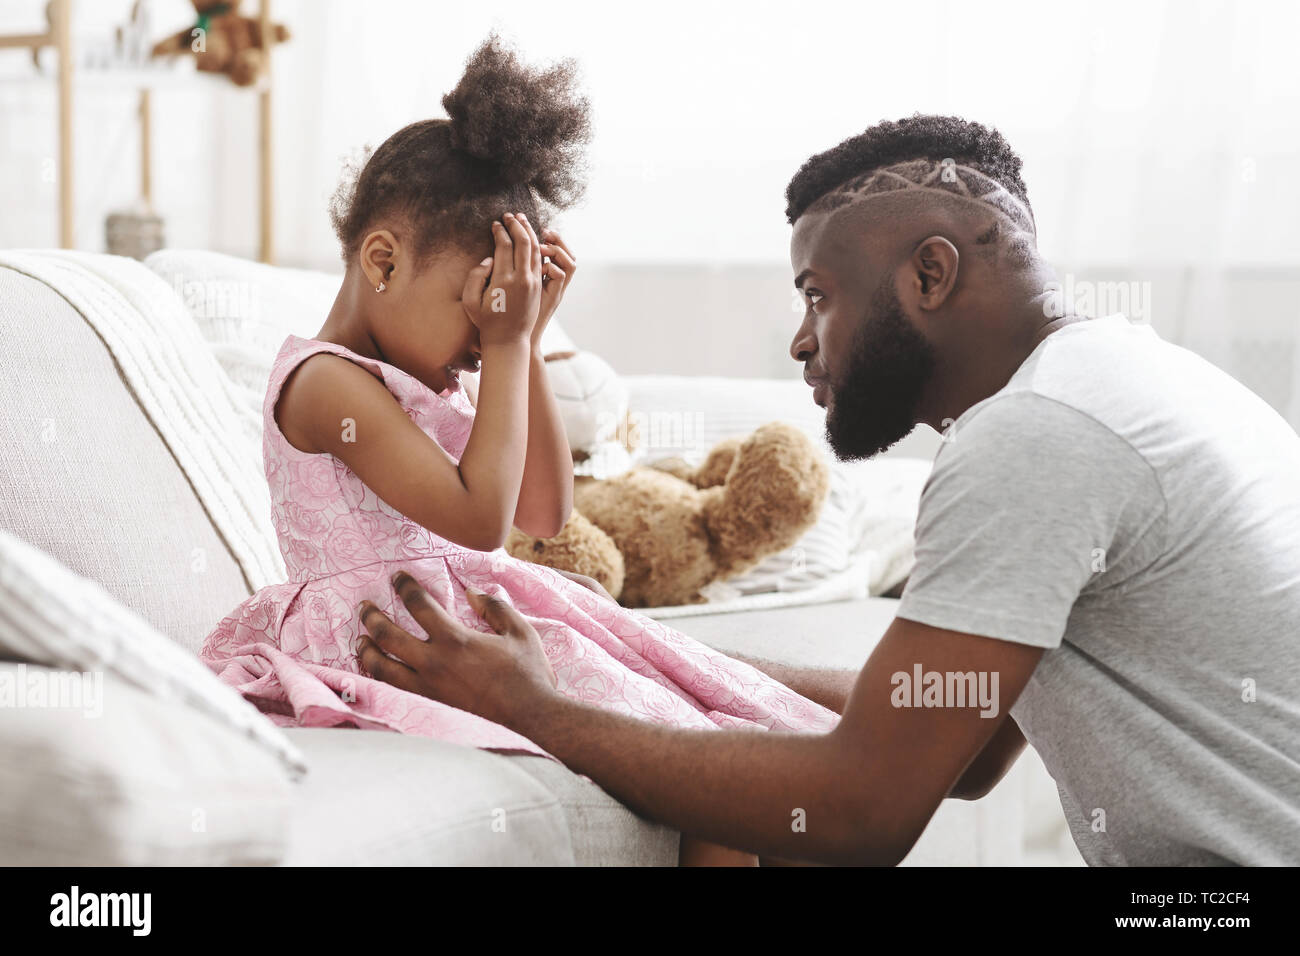 Loving african american dad comforting crying daughter Stock Photo